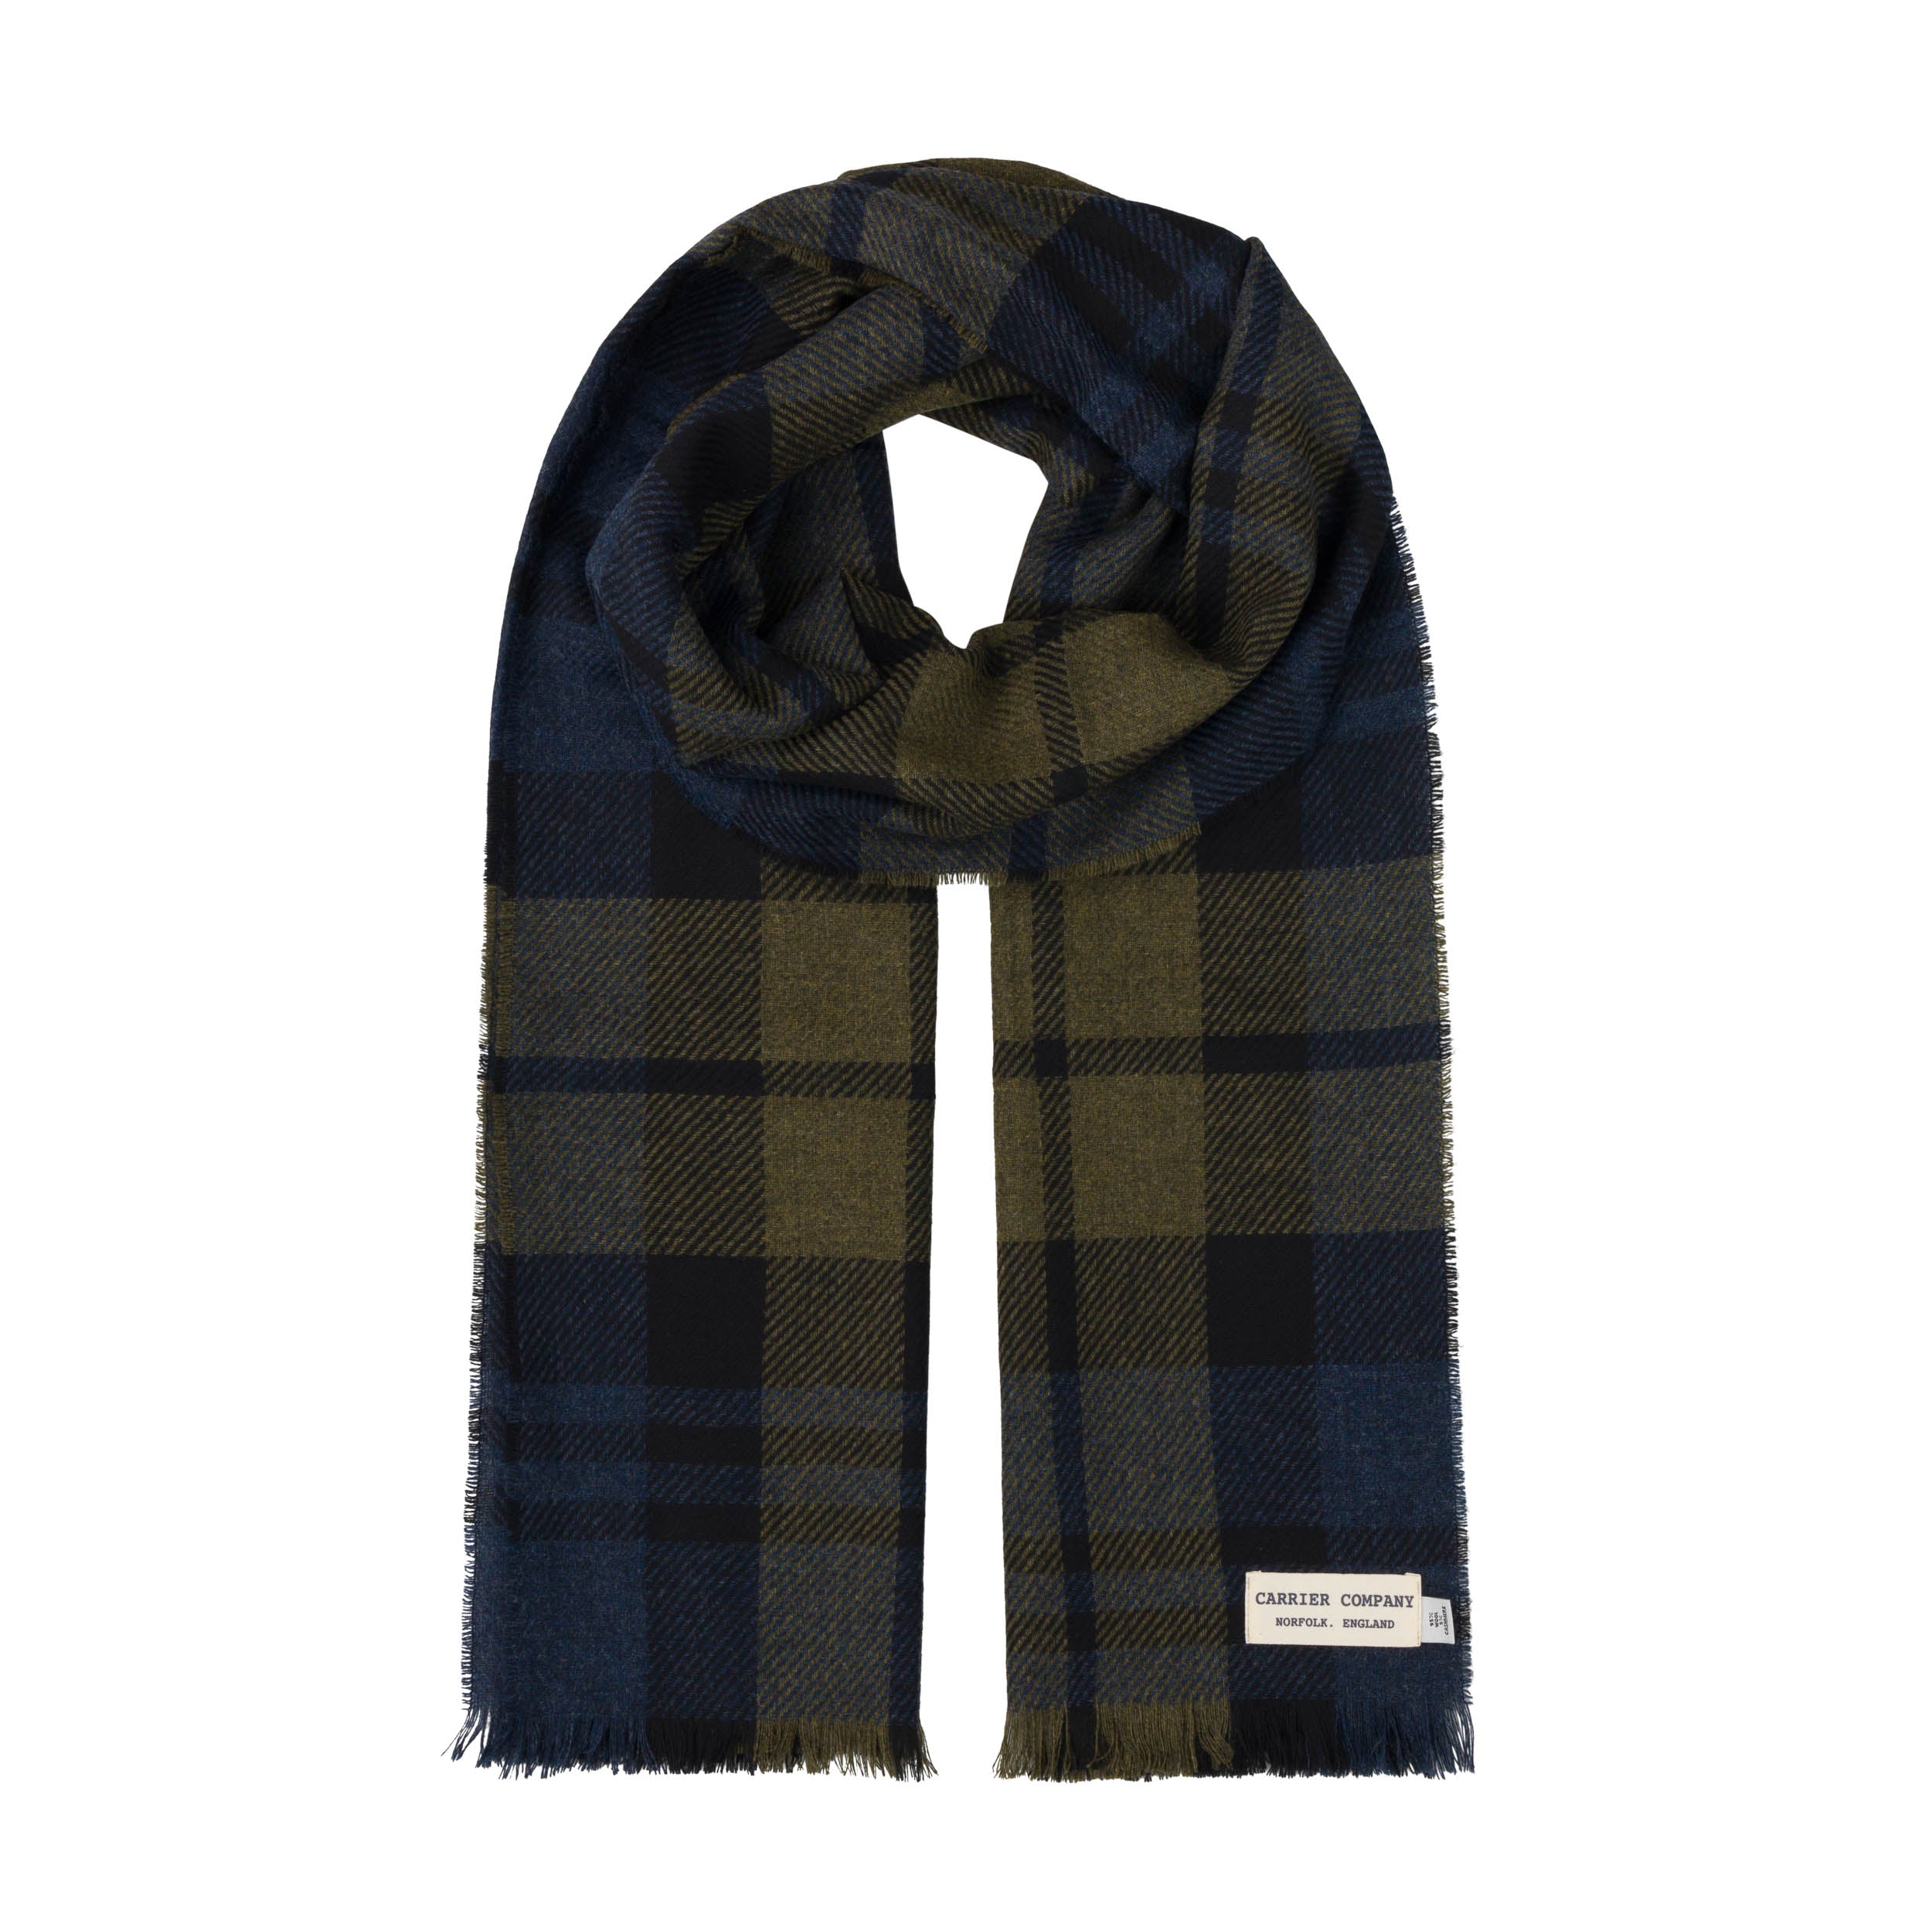 Carrier Company Luxury Cashmere & Lambswool Scarf in Black Watch Olive